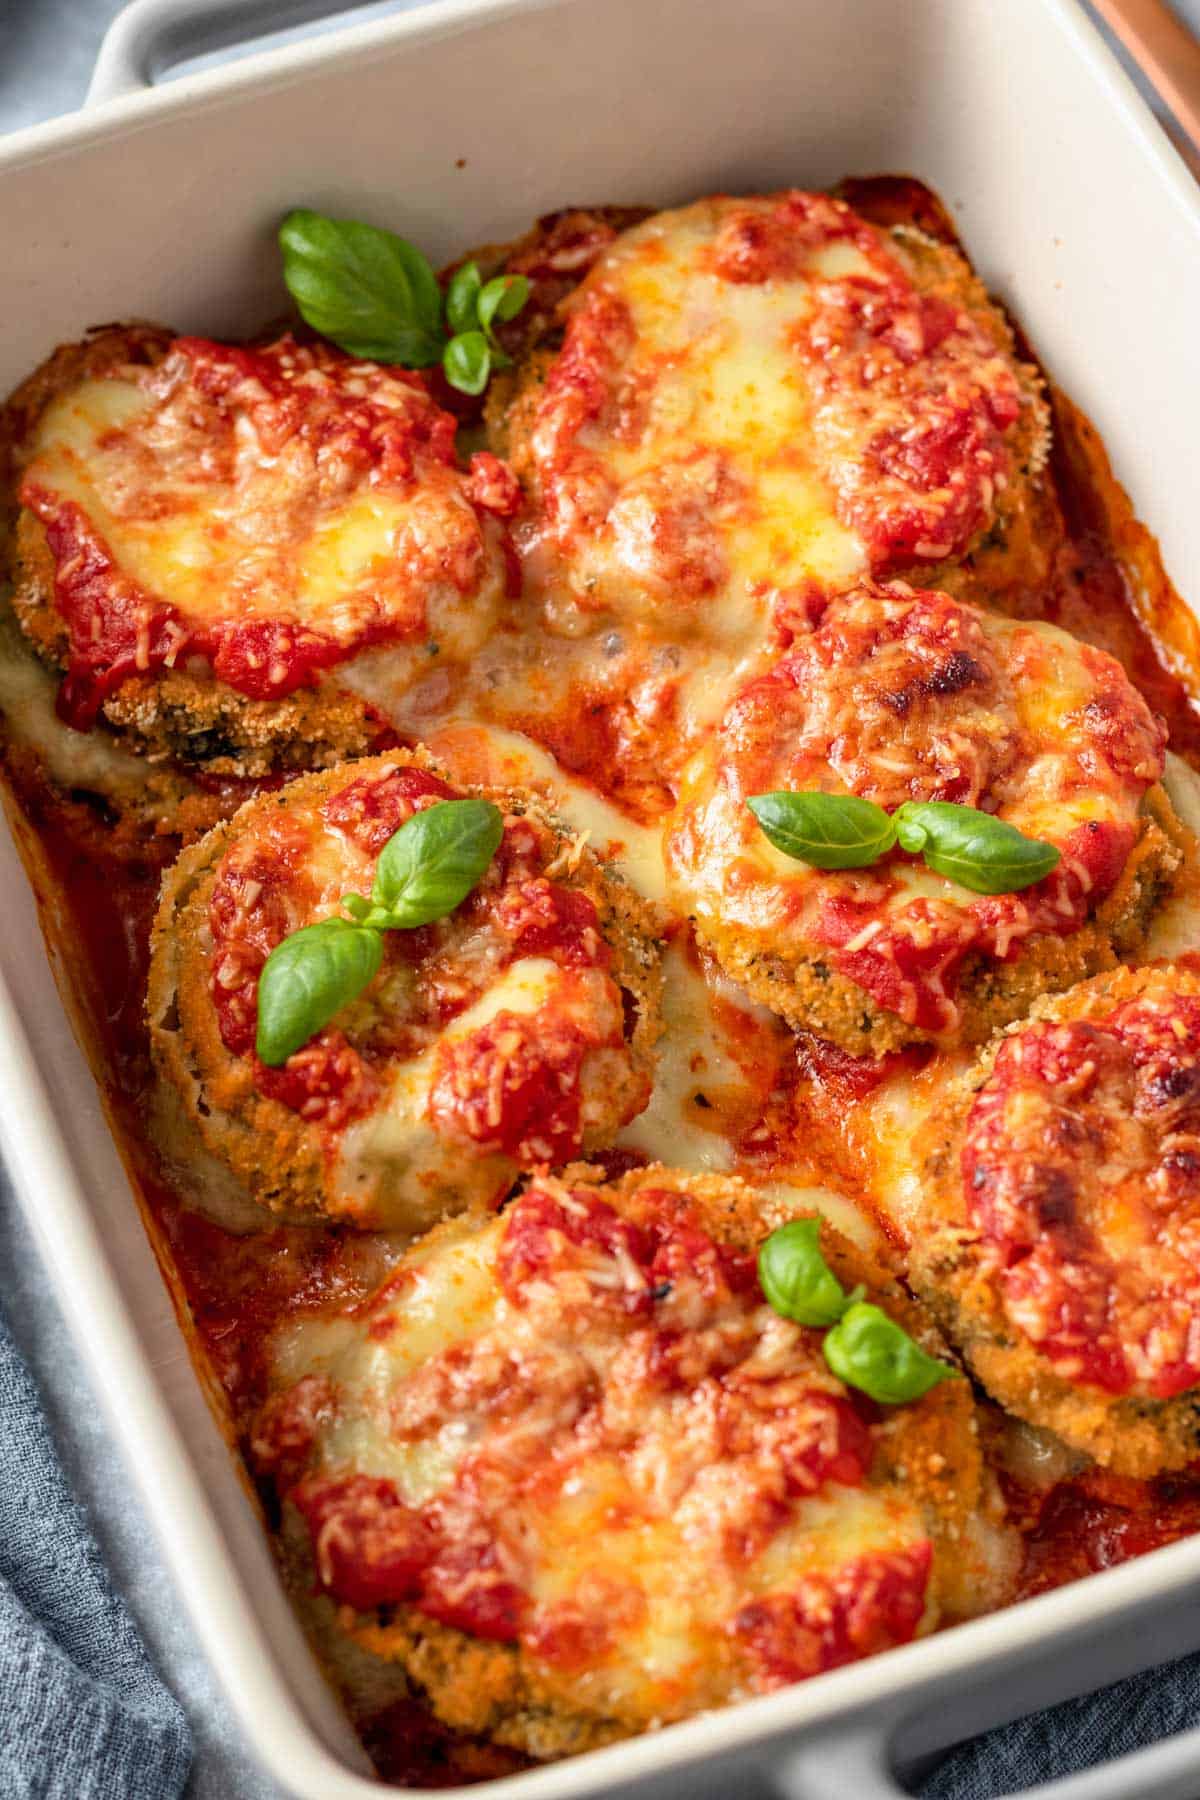 Gluten Free Eggplant Parmesan in baking dish with basil leaves